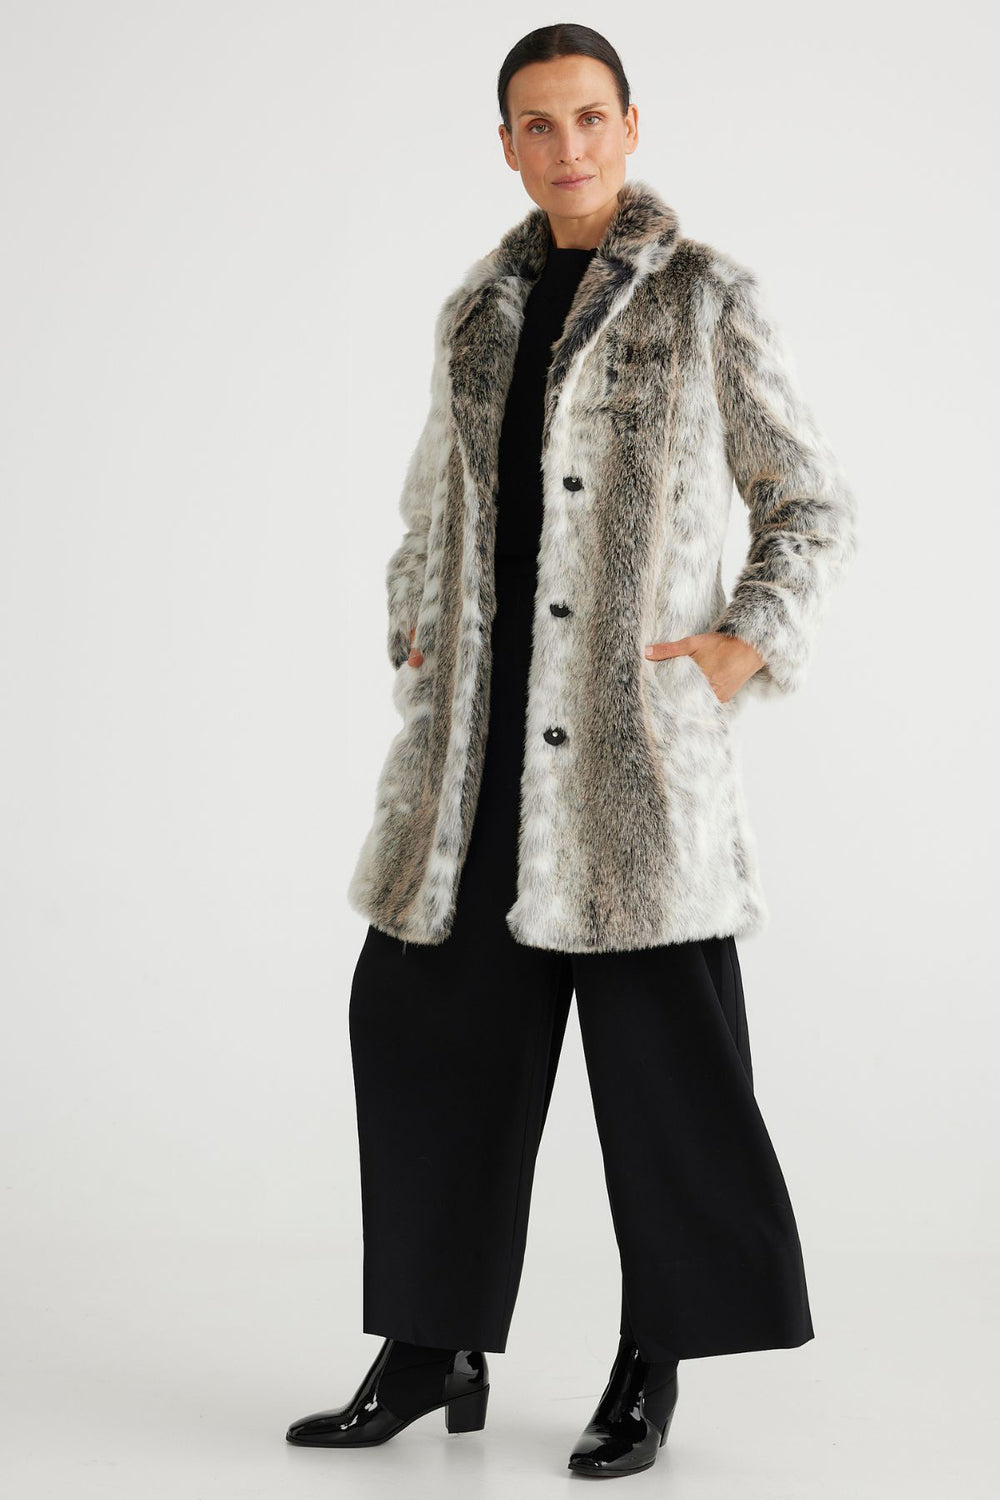 Brand Brave & True  Style BT6766-2 Colour Fawn 100% Polyester  The perfect mid length jacket  Faux Fur  Snap covered buttons for closure Pockets  Fully Lined 